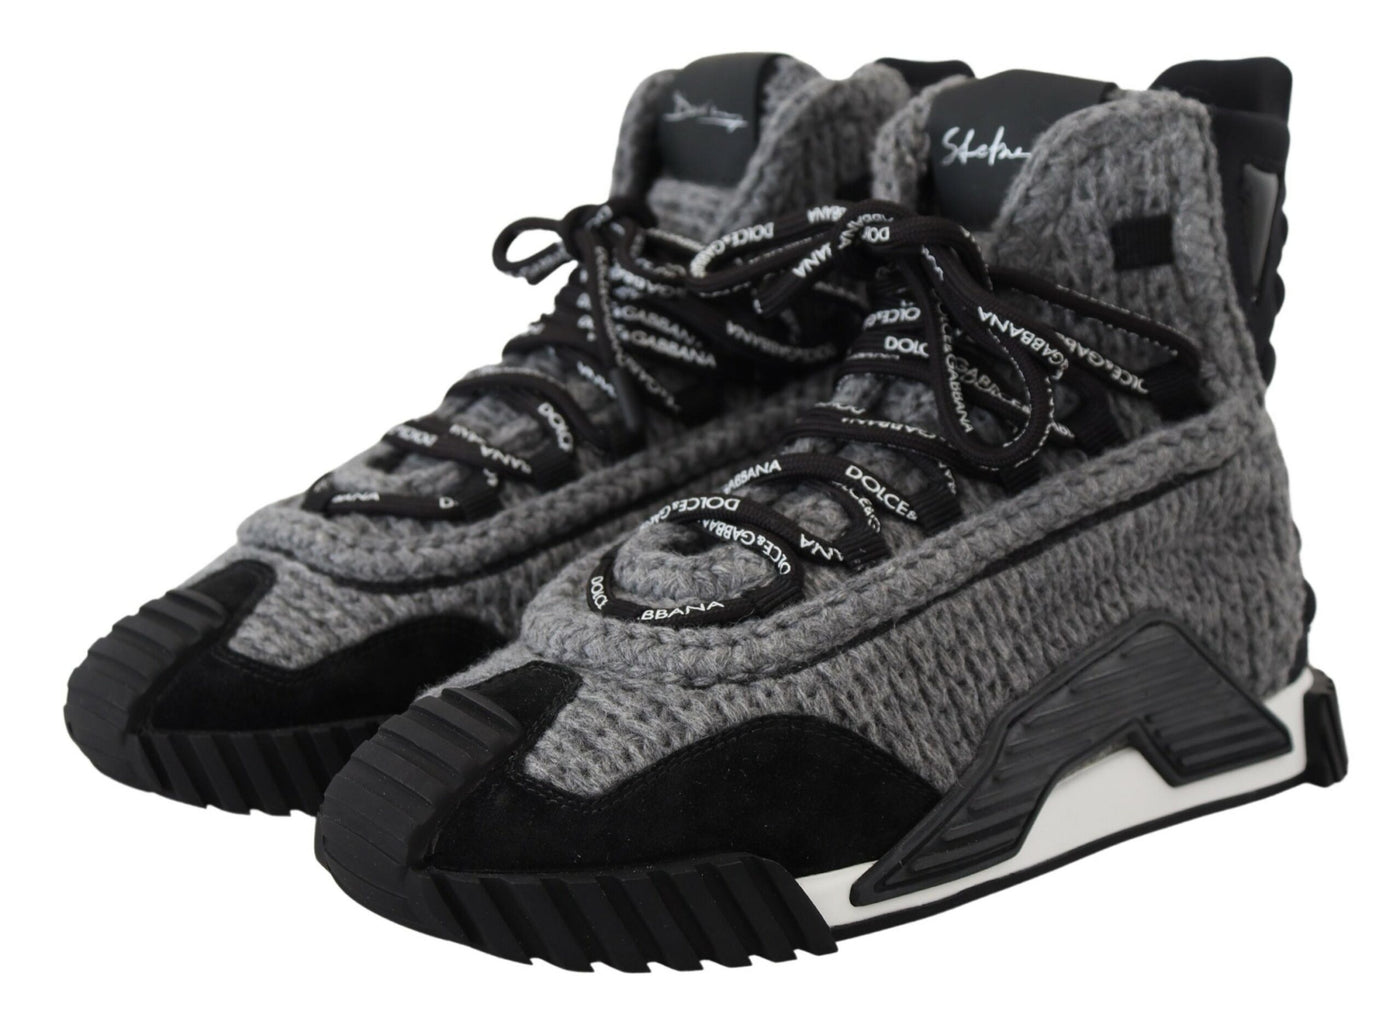 Black Gray Fabric High Tops NS1 FUTURE Sneakers